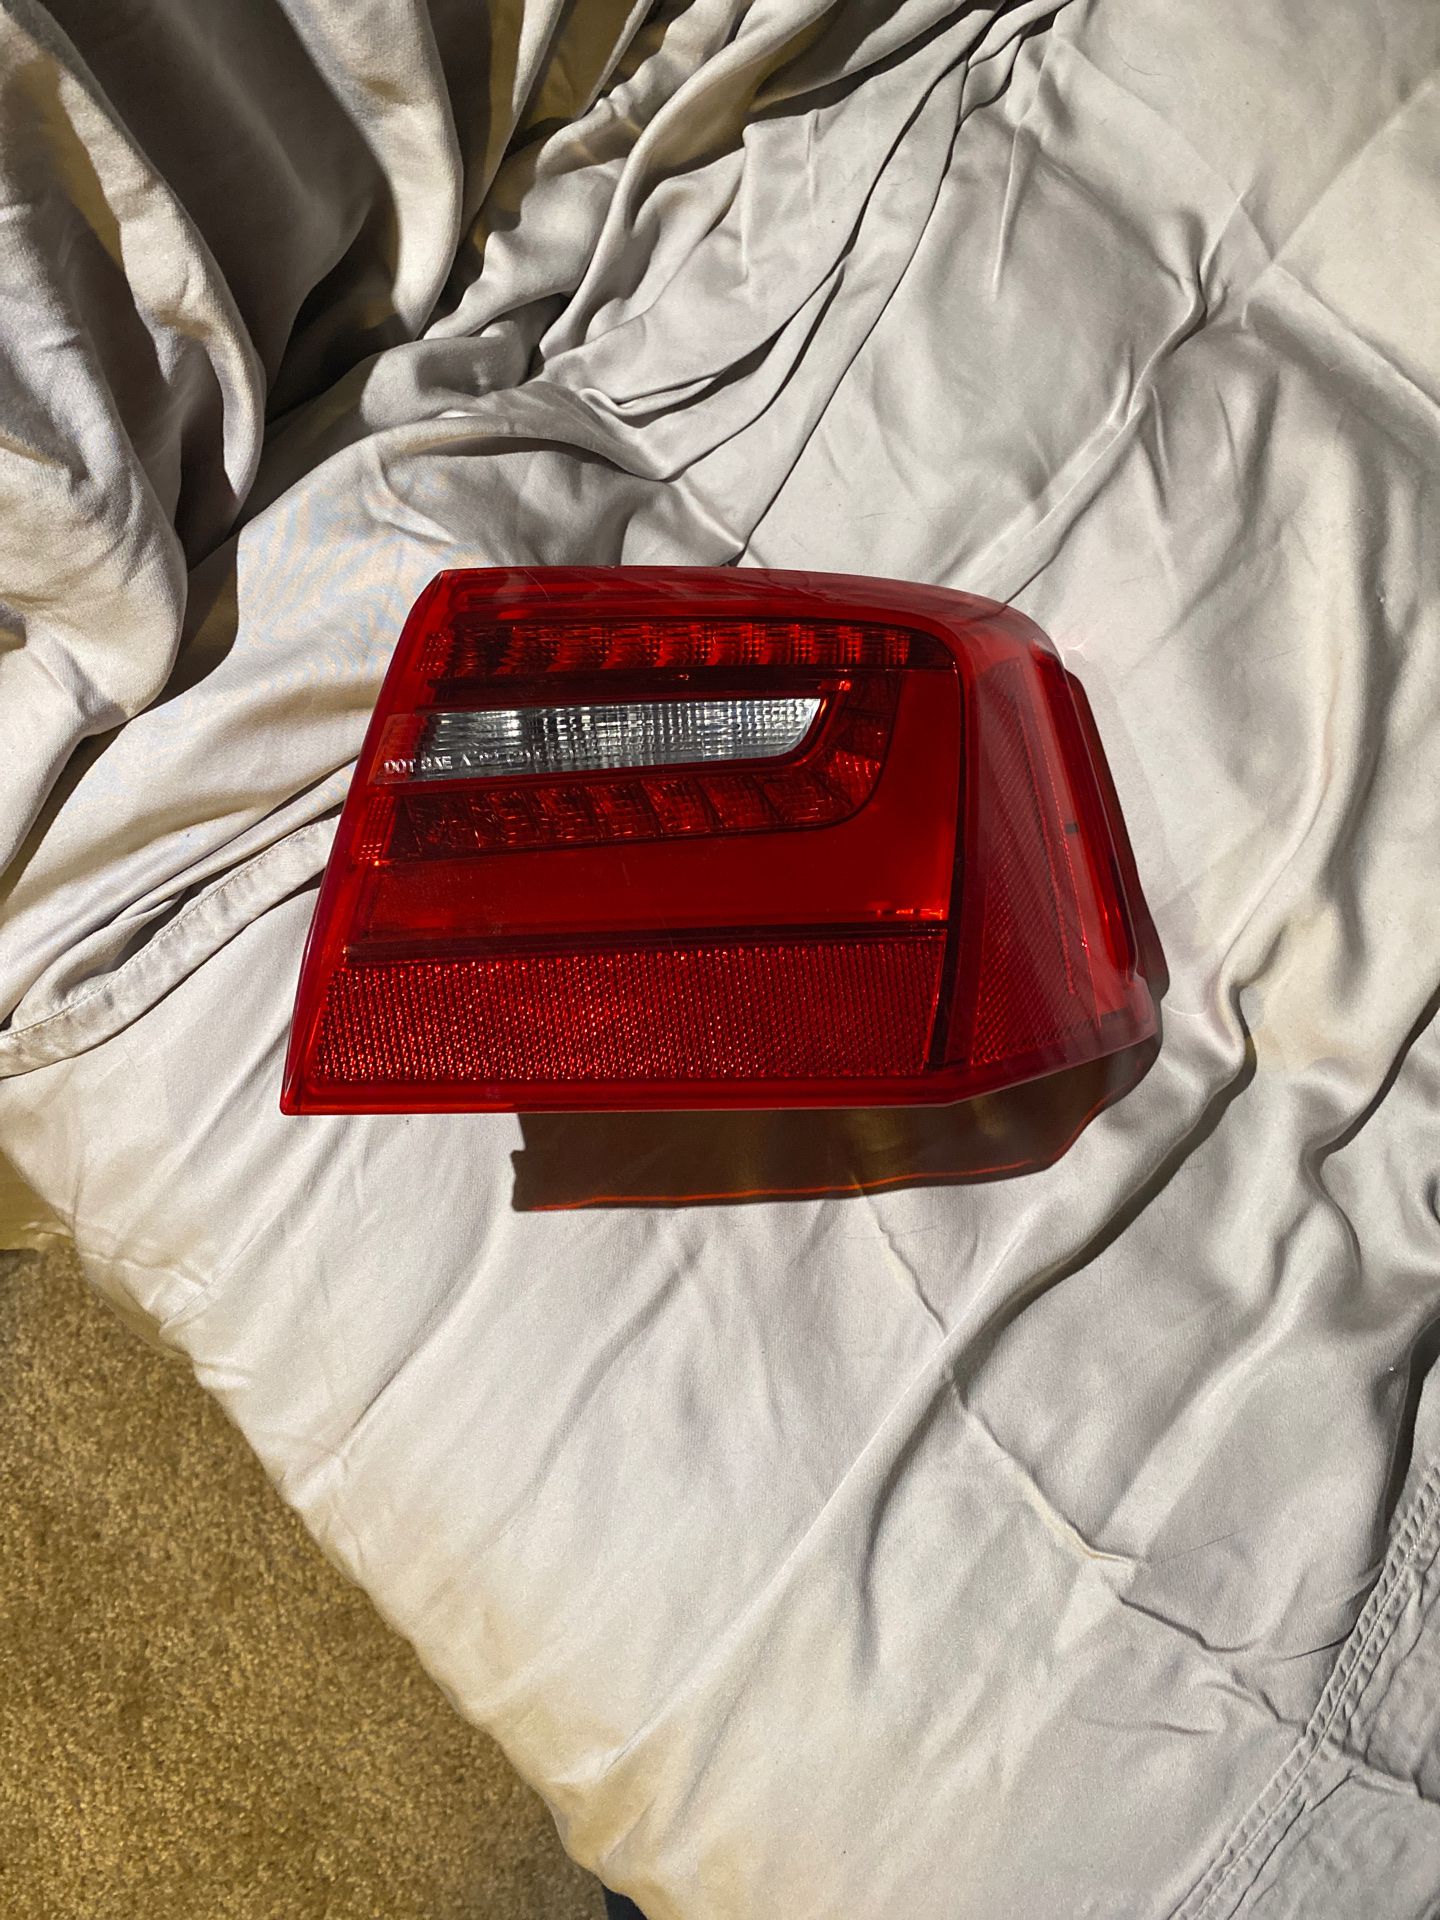 2012-2016 Audi a6 tail light have both